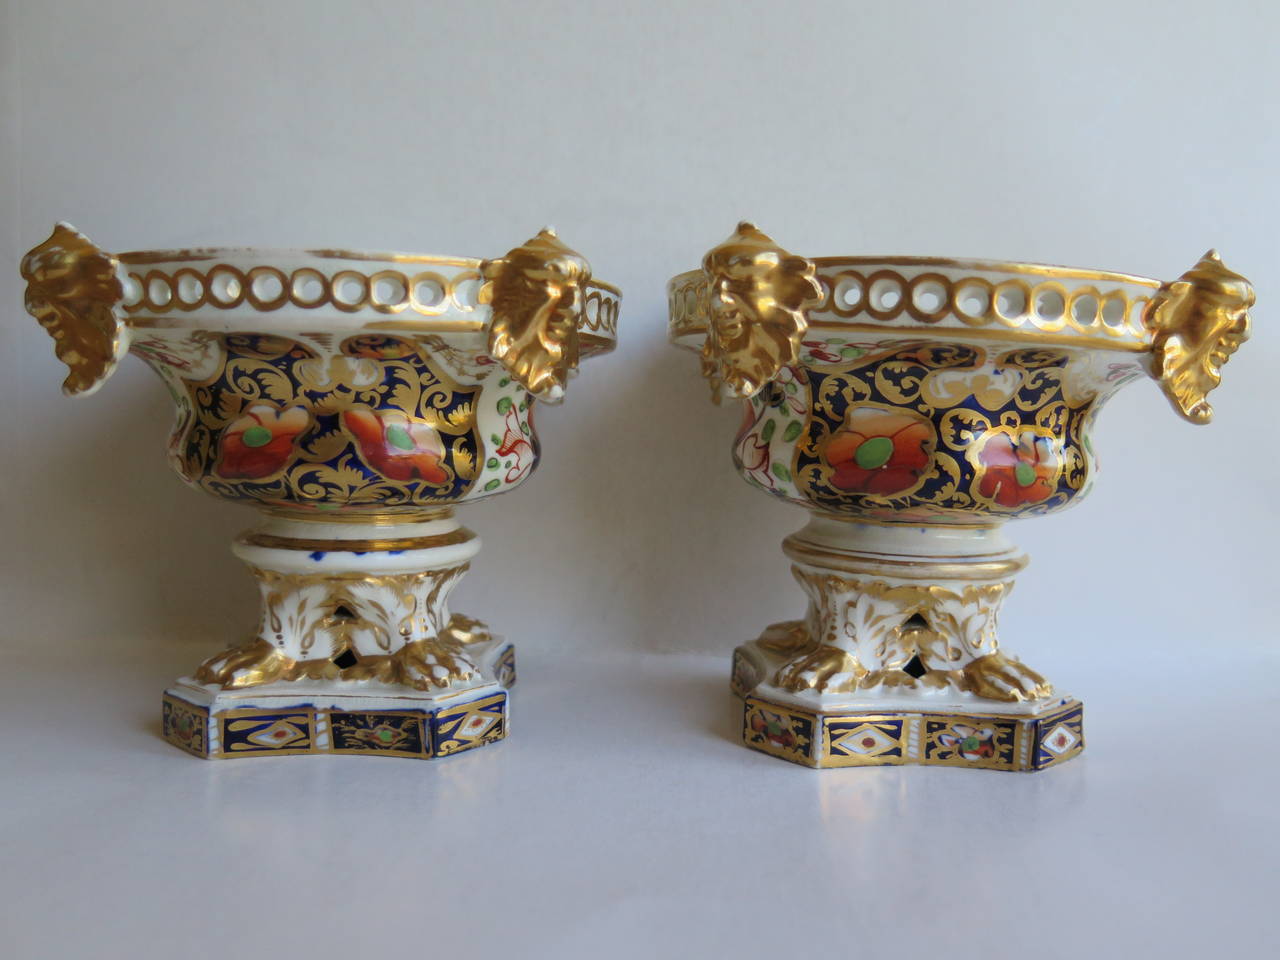 This is a rare pair of porcelain pot-Pourri urns made by the Derby factory, in the reign of George 111 in the early 19th century, circa 1815.
 
Each urn has a circular shape bowl section, supported on a quadro-form base. The design is classical